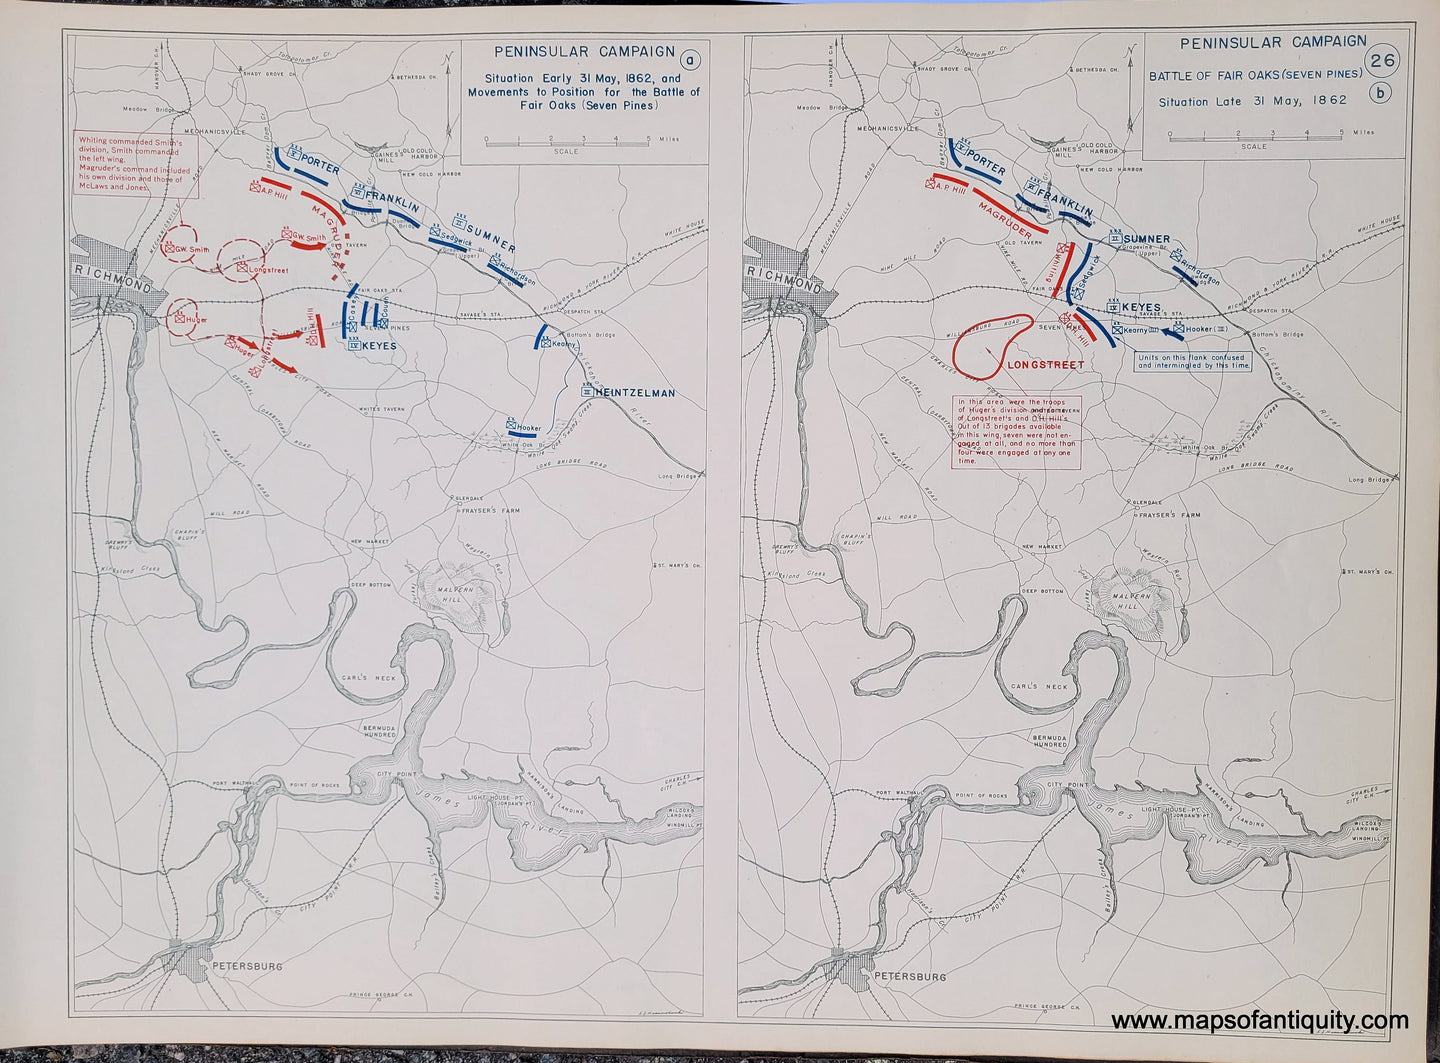 Genuine-Antique-Map-Peninsular-Campaign-Situation-Early-31-May-1862-and-Movements-to-Position-for-the-Battle-of-Fair-Oaks--Seven-Pines--and-Battle-of-Fair-Oaks--Seven-Pines--Situation-Late-31-May-1862-1948-Matthew-Forney-Steele-Dept-of-Military-Art-and-Engineering-US-Military-Academy-West-Point-Maps-Of-Antiquity